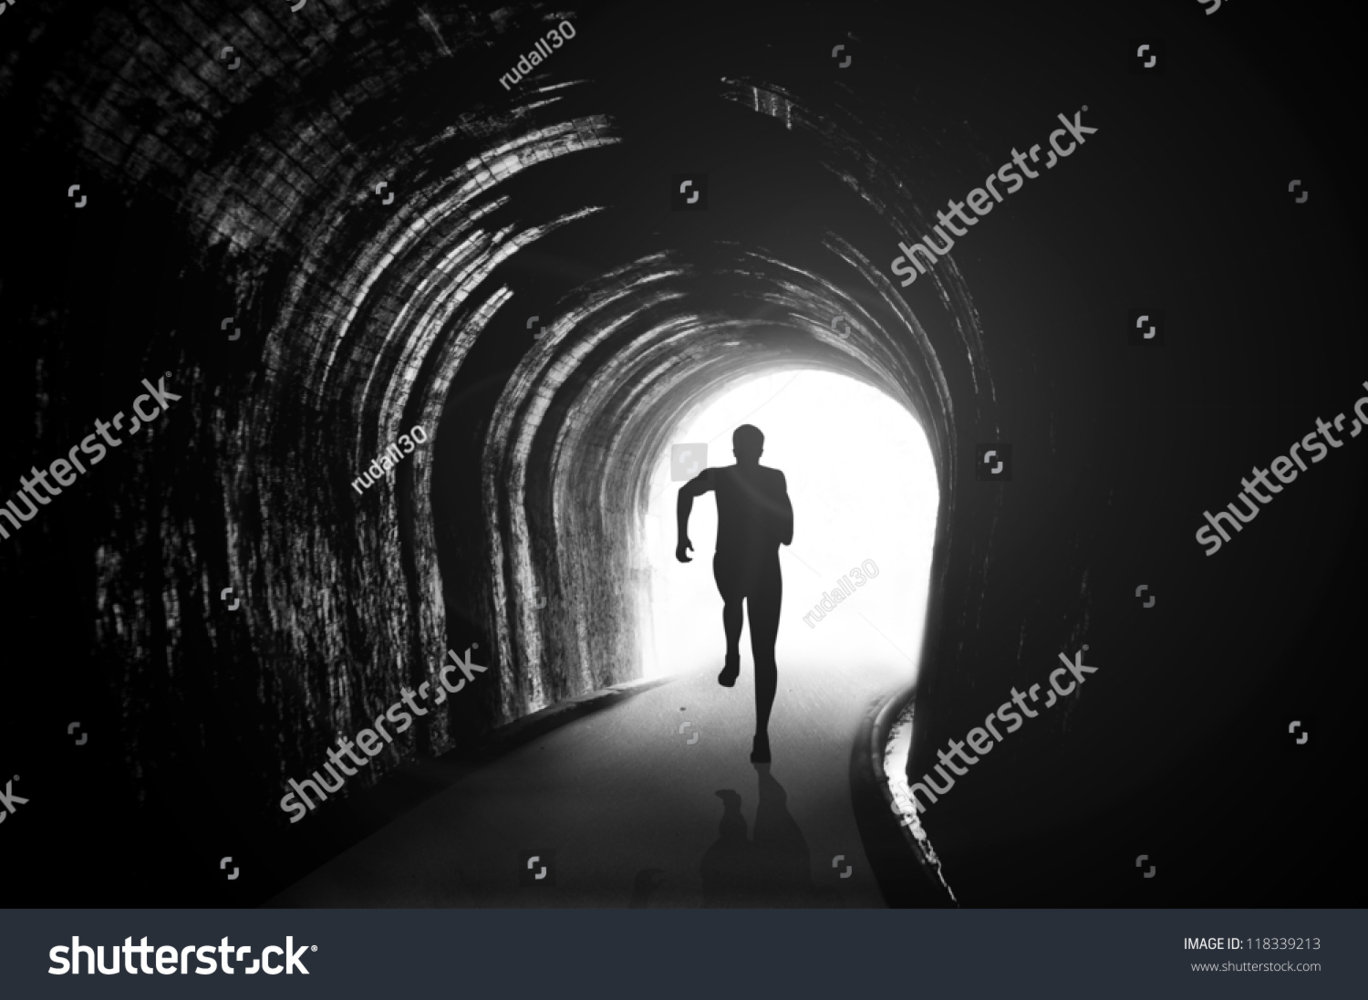 stock-photo-silhouette-illustration-of-a-man-figure-running-in-the-tunnel-118339213.jpg